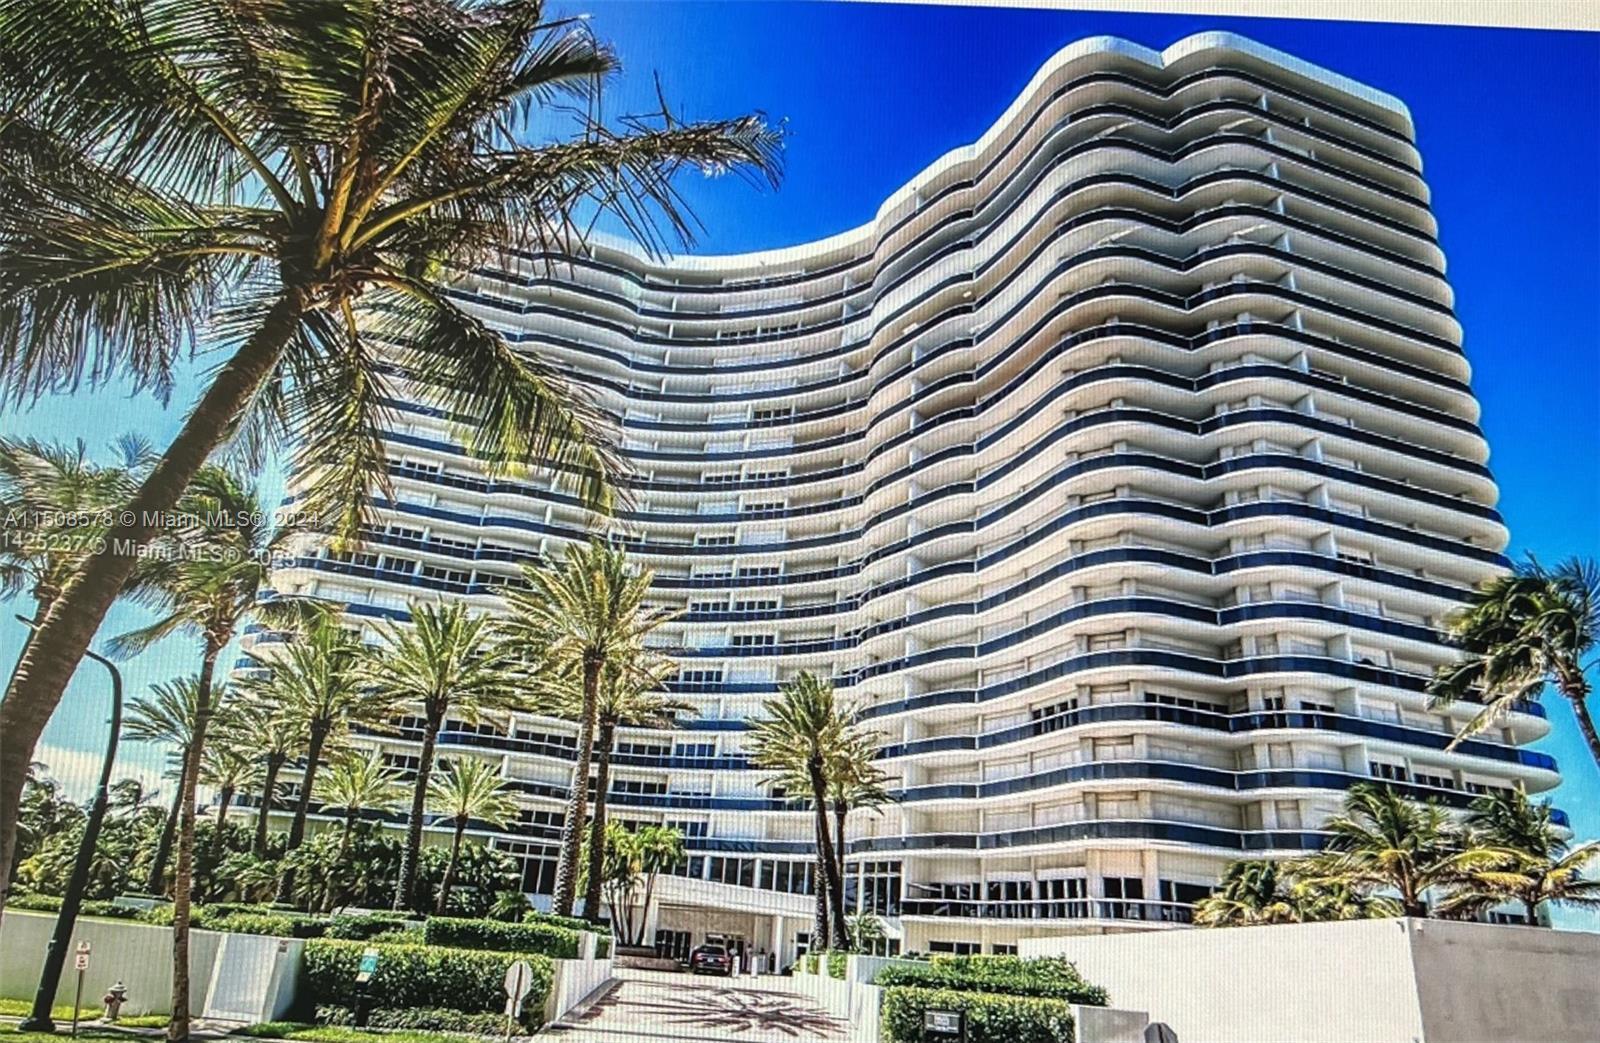 Photo of 9601 Collins Ave #805 in Bal Harbour, FL